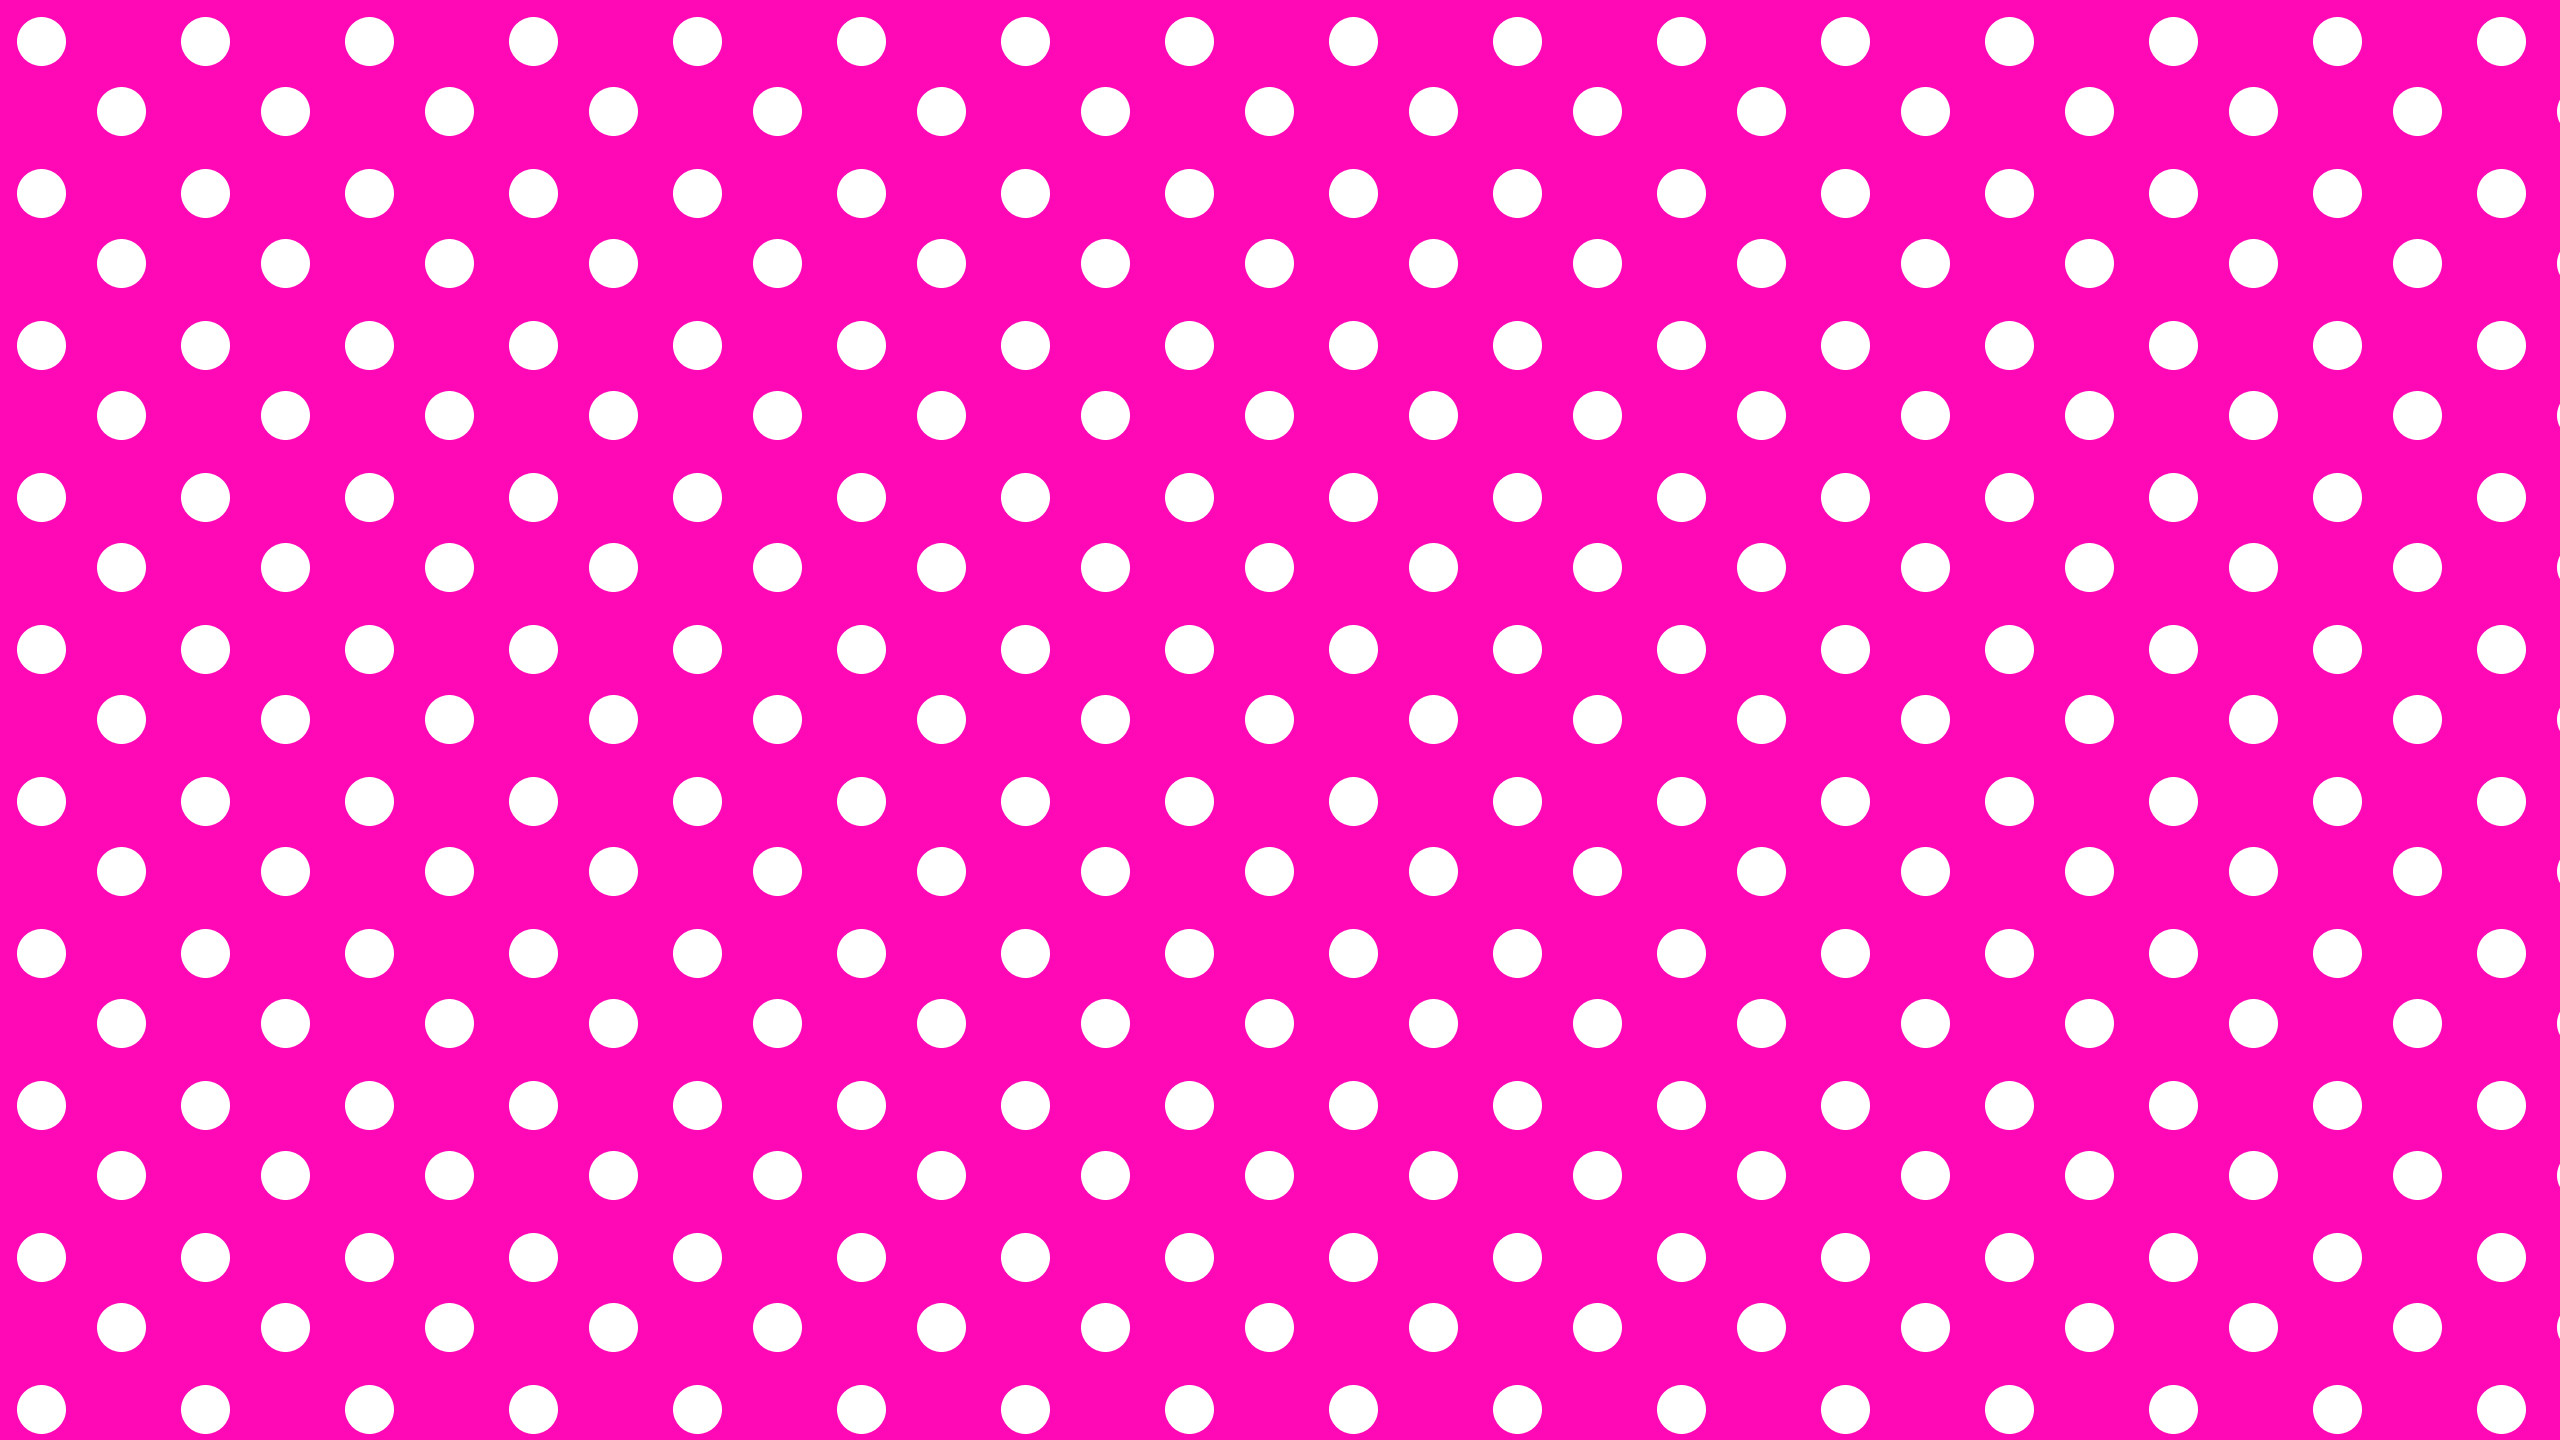 Pink Polka Dot Wallpaper Images 5952 Hot Sex Picture